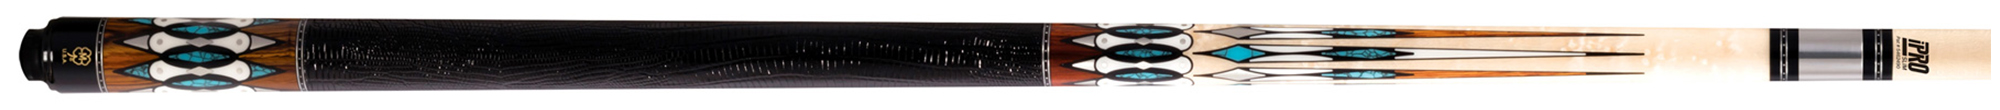 PK3070-CY: McDermott CRM1402 Cue of the year 2019